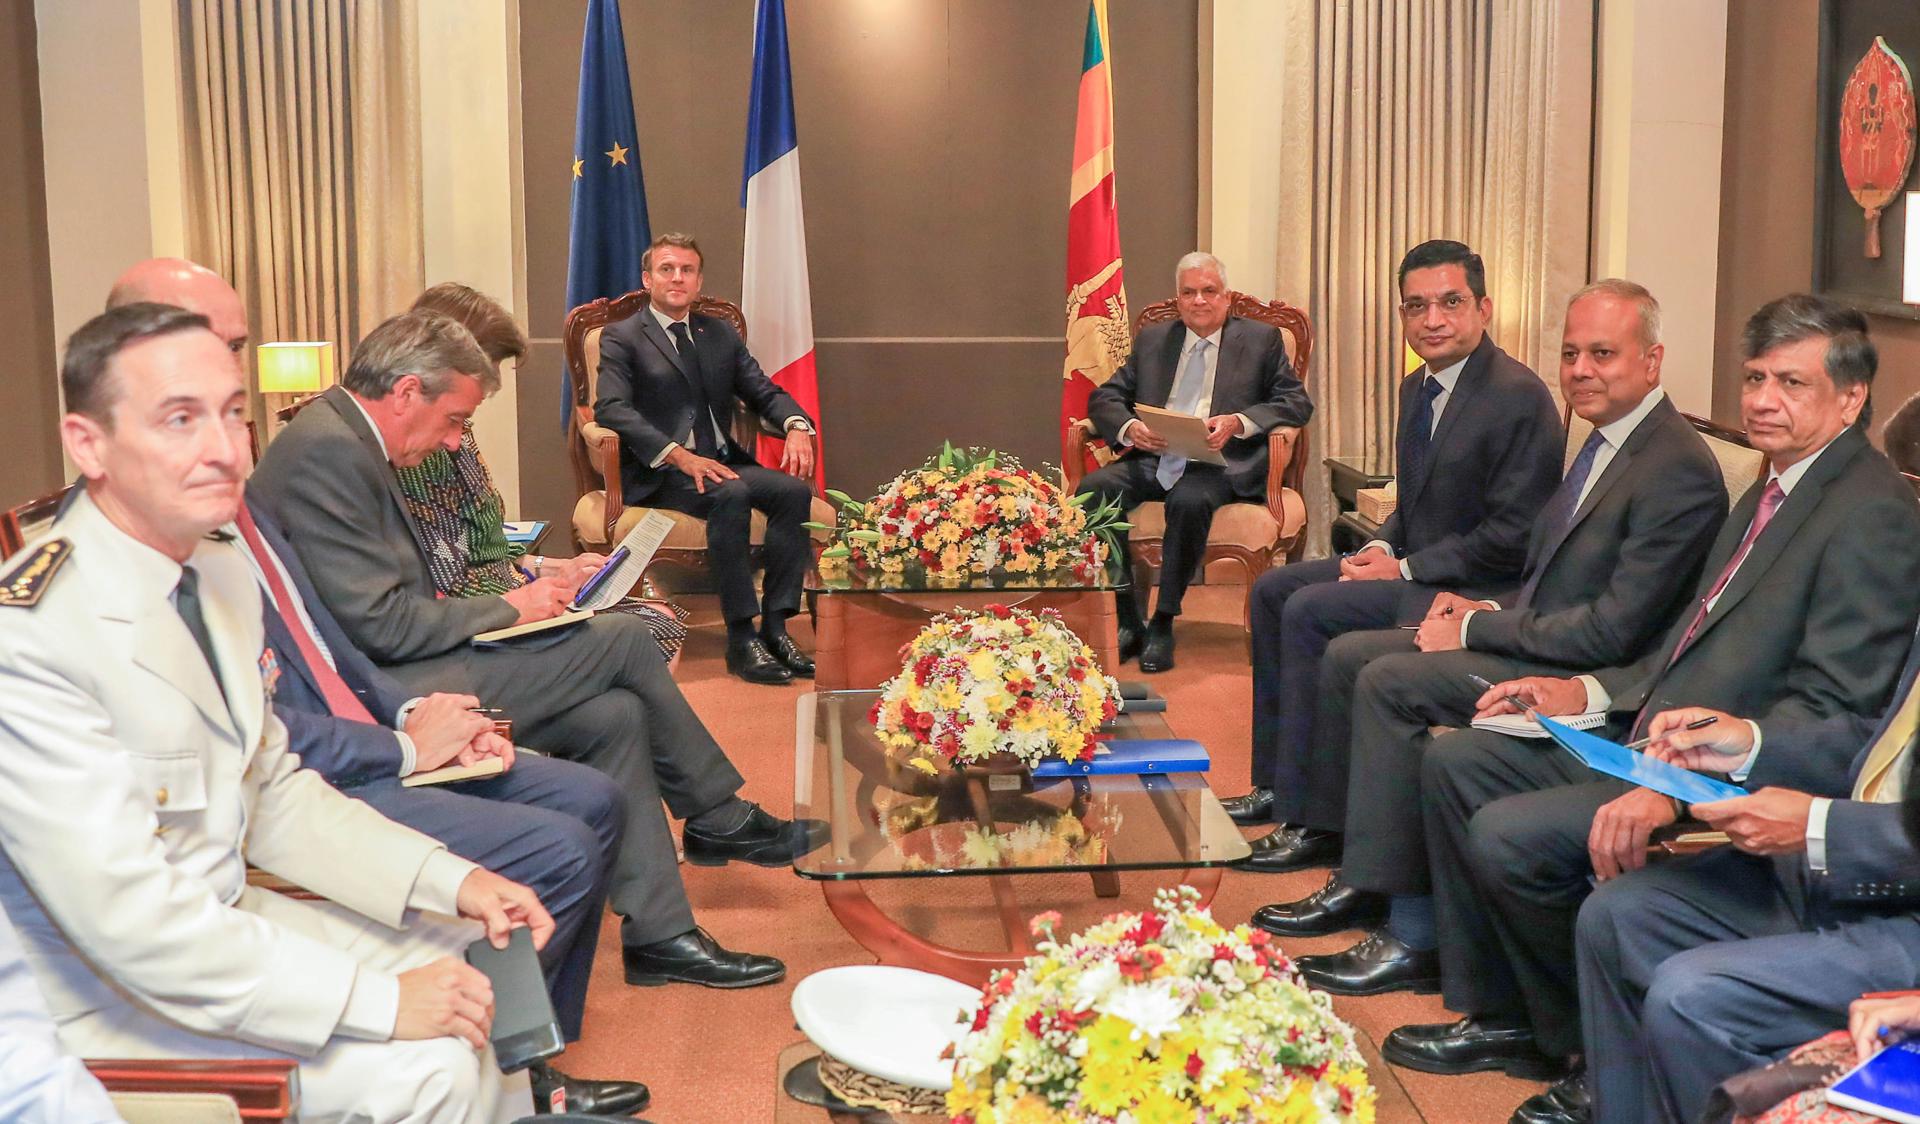 A handout photo made available by the Sri Lankan President's Media Division shows Sri Lankan President Ranil Wickremesinghe (C-R) during a meeting with French President Emmanuel Macron (C-L) at Bandaranaike International Airport in Colombo, Sri Lanka, 28 July 2023 (issued 29 July 2023). EFE/EPA/President's Media Division HANDOUT EDITORIAL USE ONLY/NO SALES